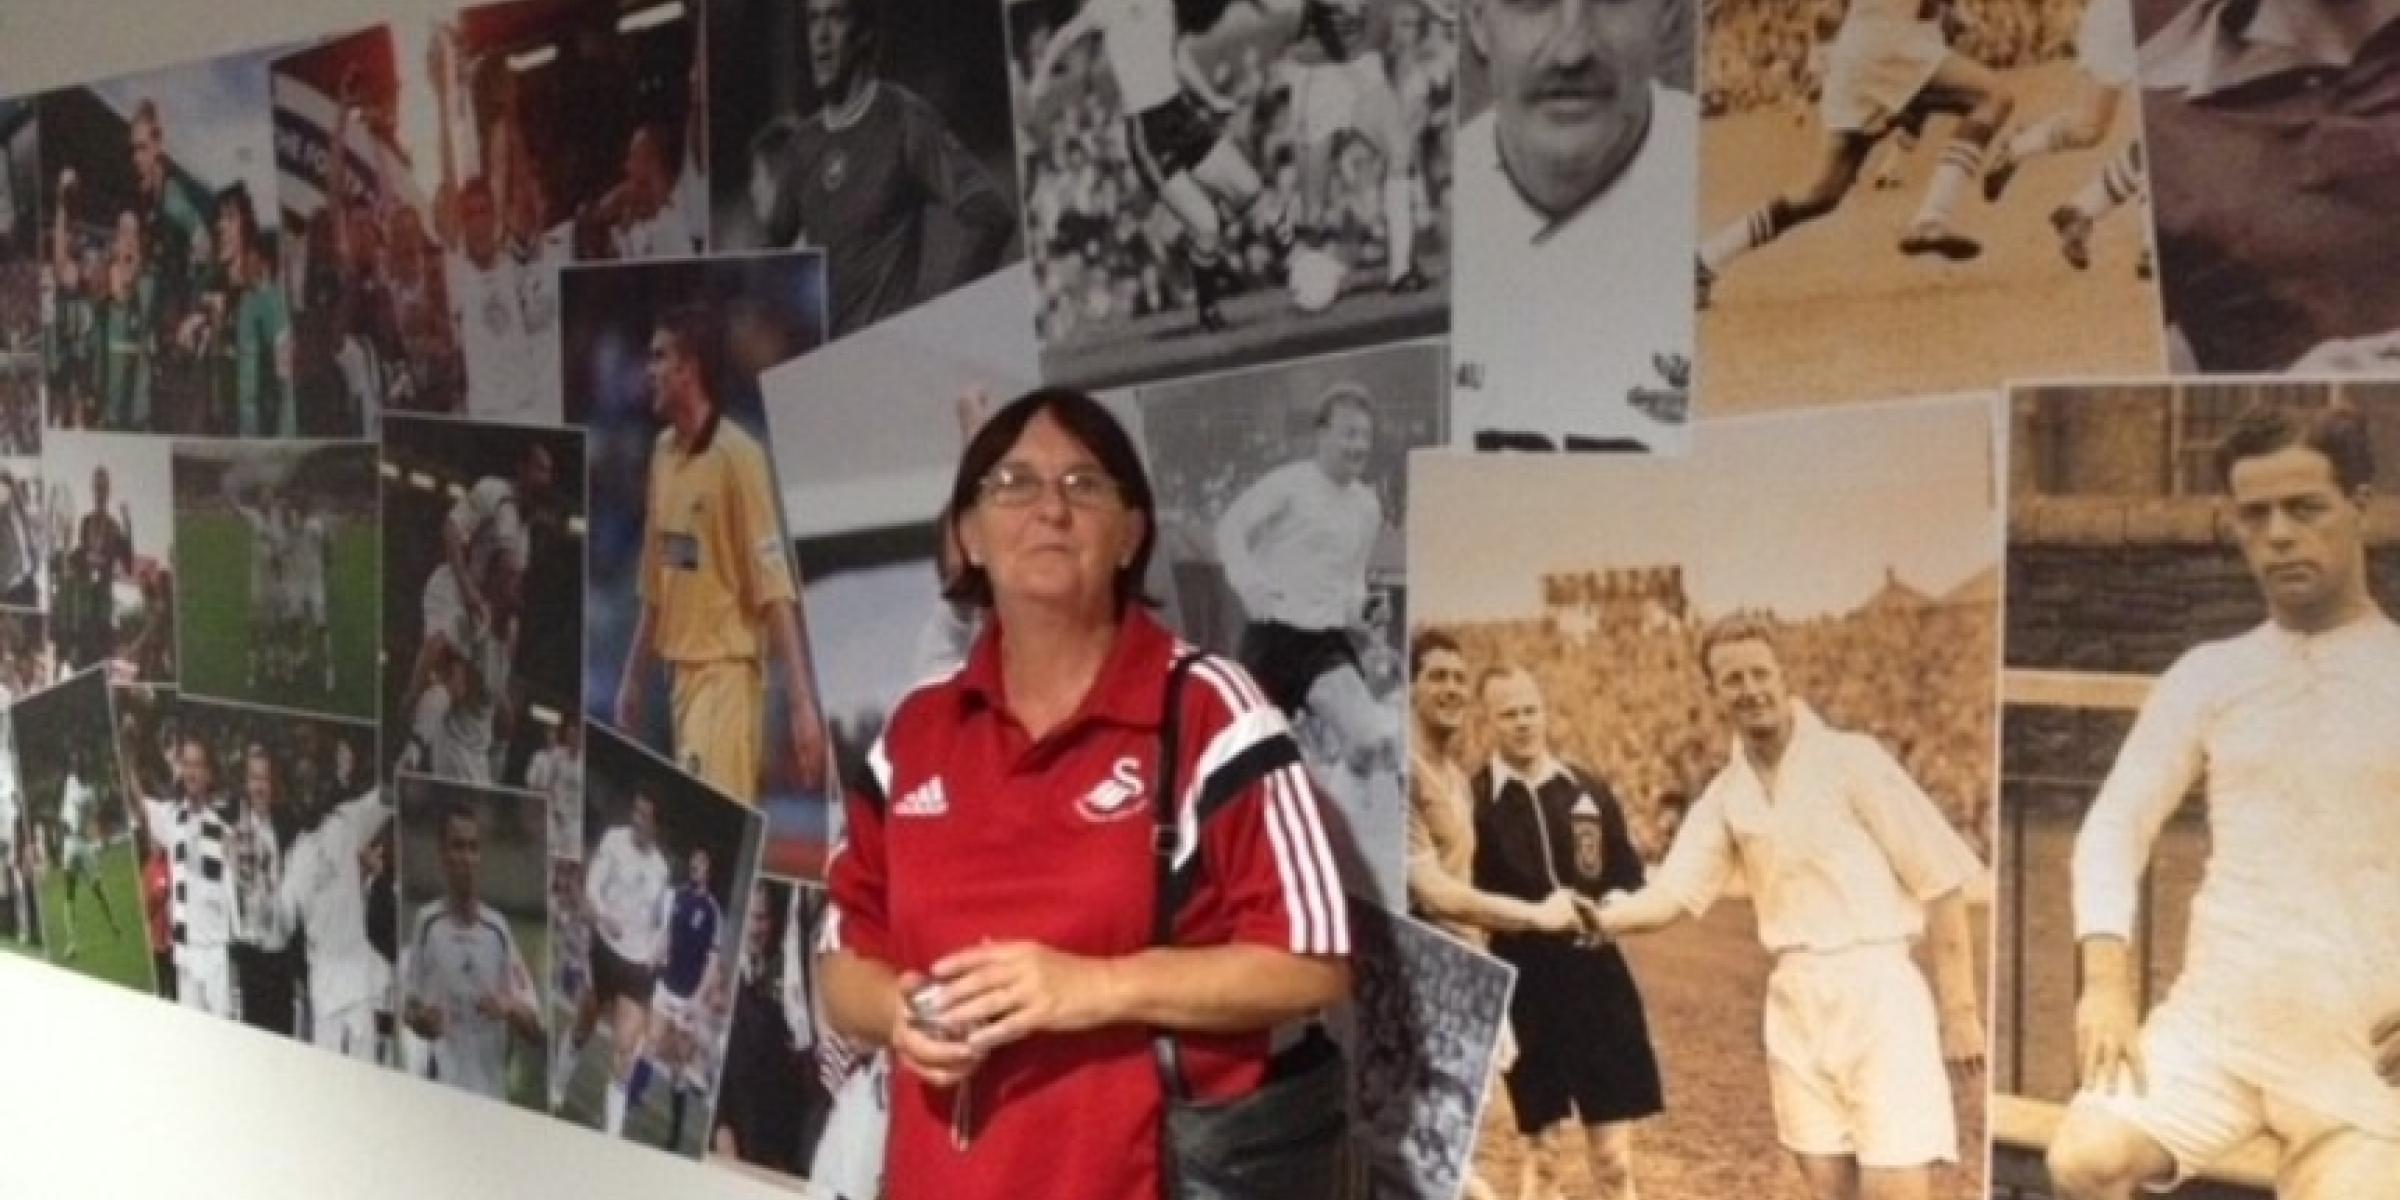 Sue at the Swansea City stadium tour, in front of a wall covered in pictures of famous football players